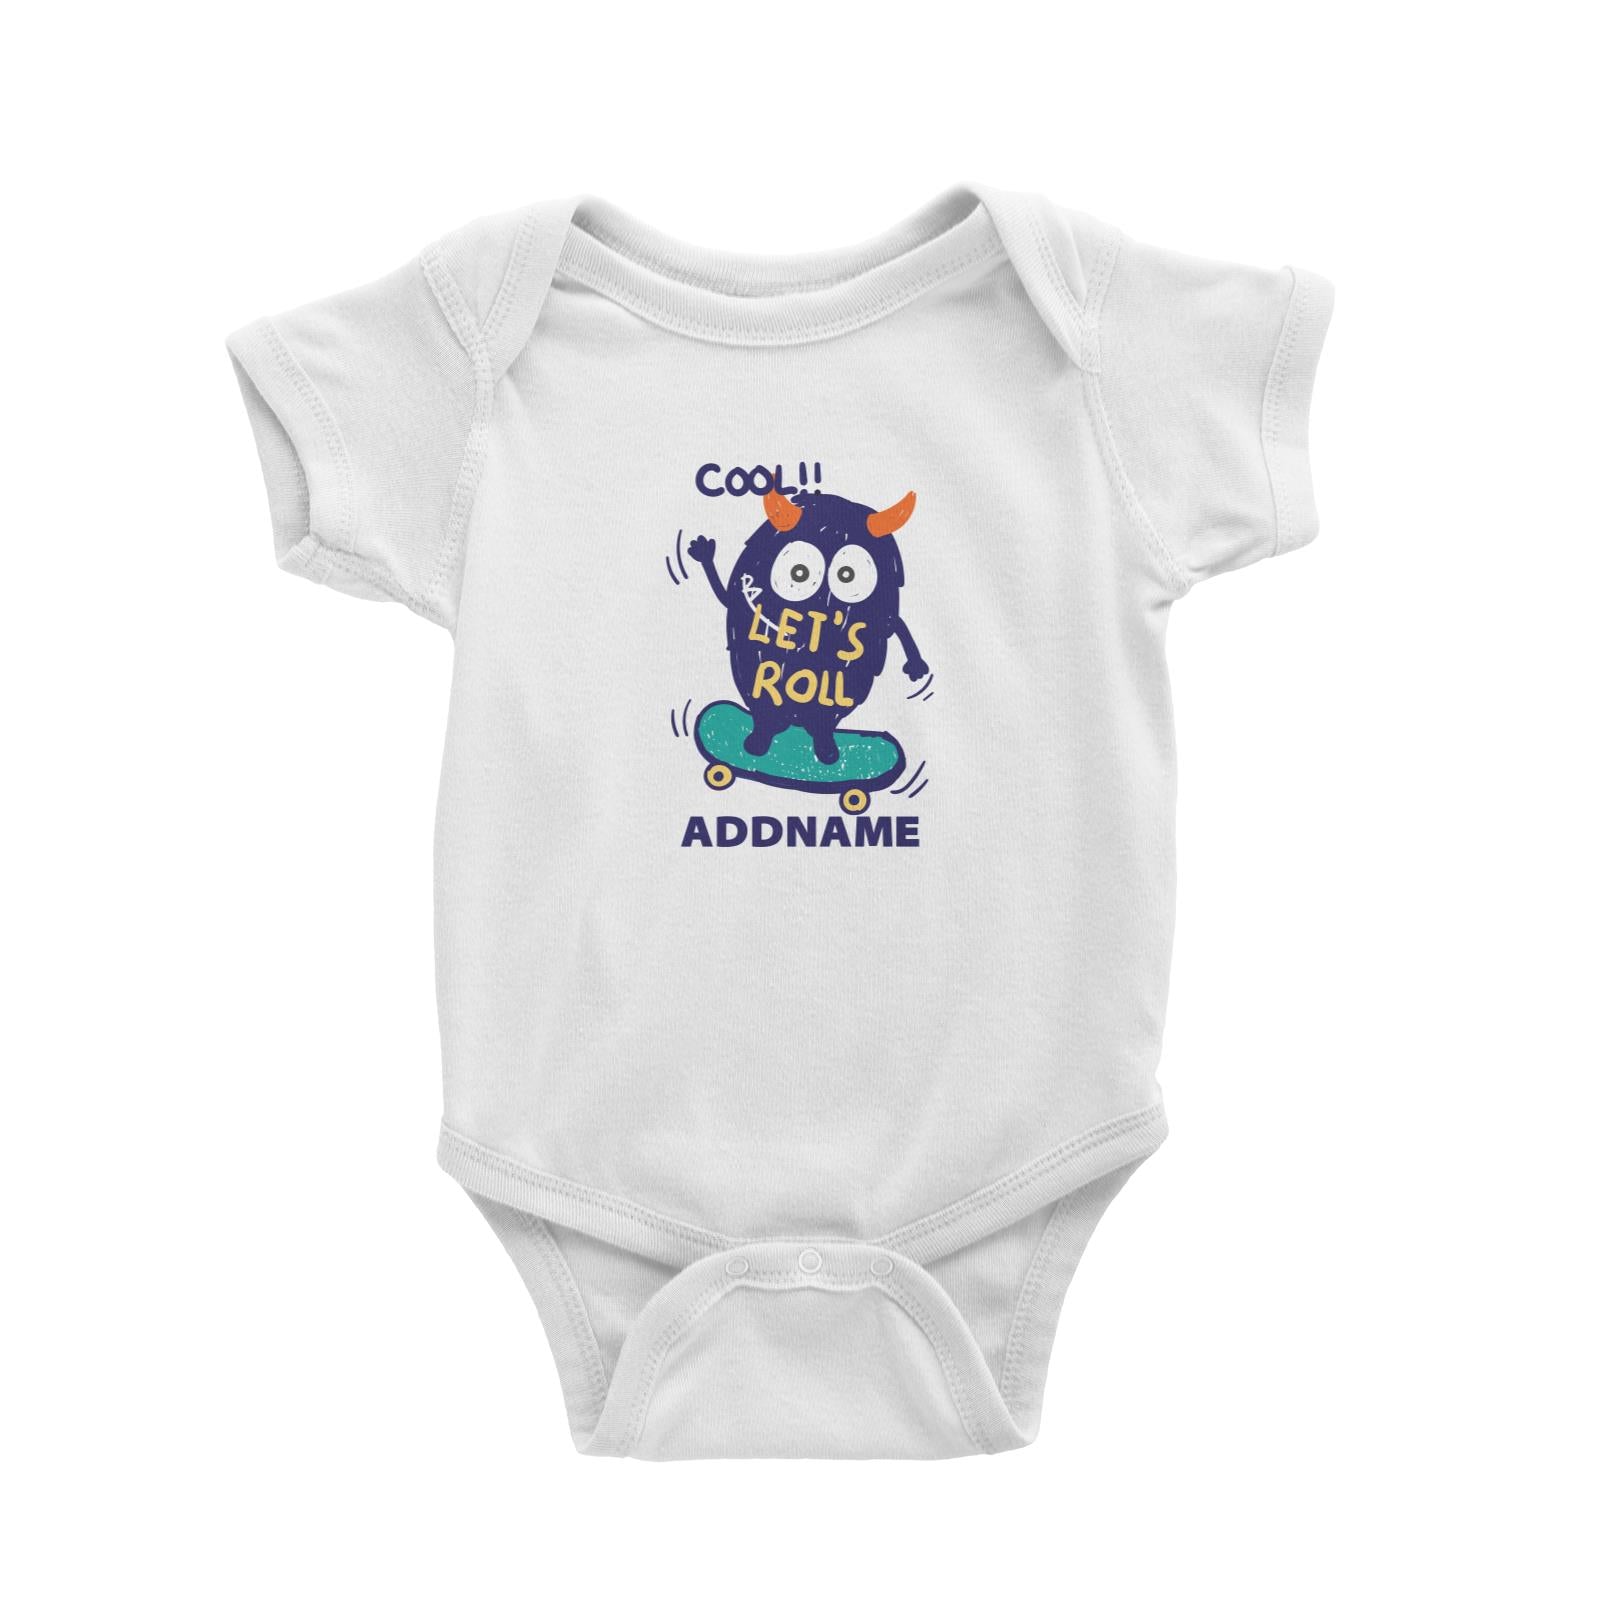 Cool Cute Monster Cool Let's Roll Monster Addname Baby Romper